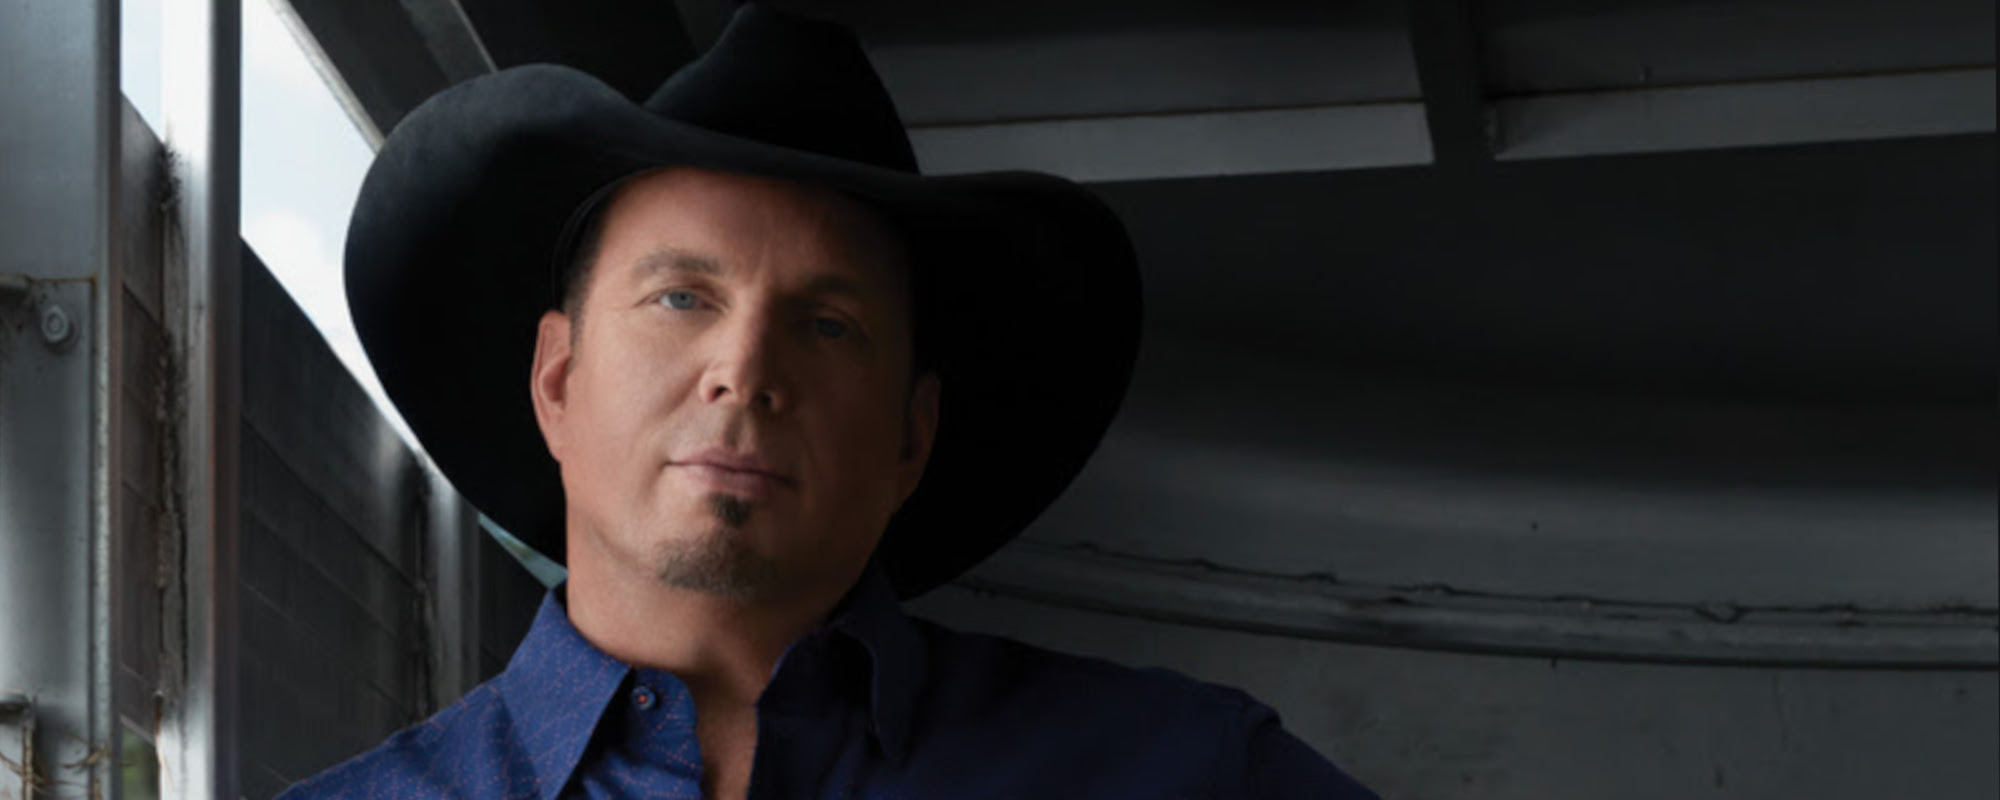 Garth Brooks Stops in Music City for Make-Up Stadium Show: “A Second Chance at a Once in a Lifetime Opportunity”